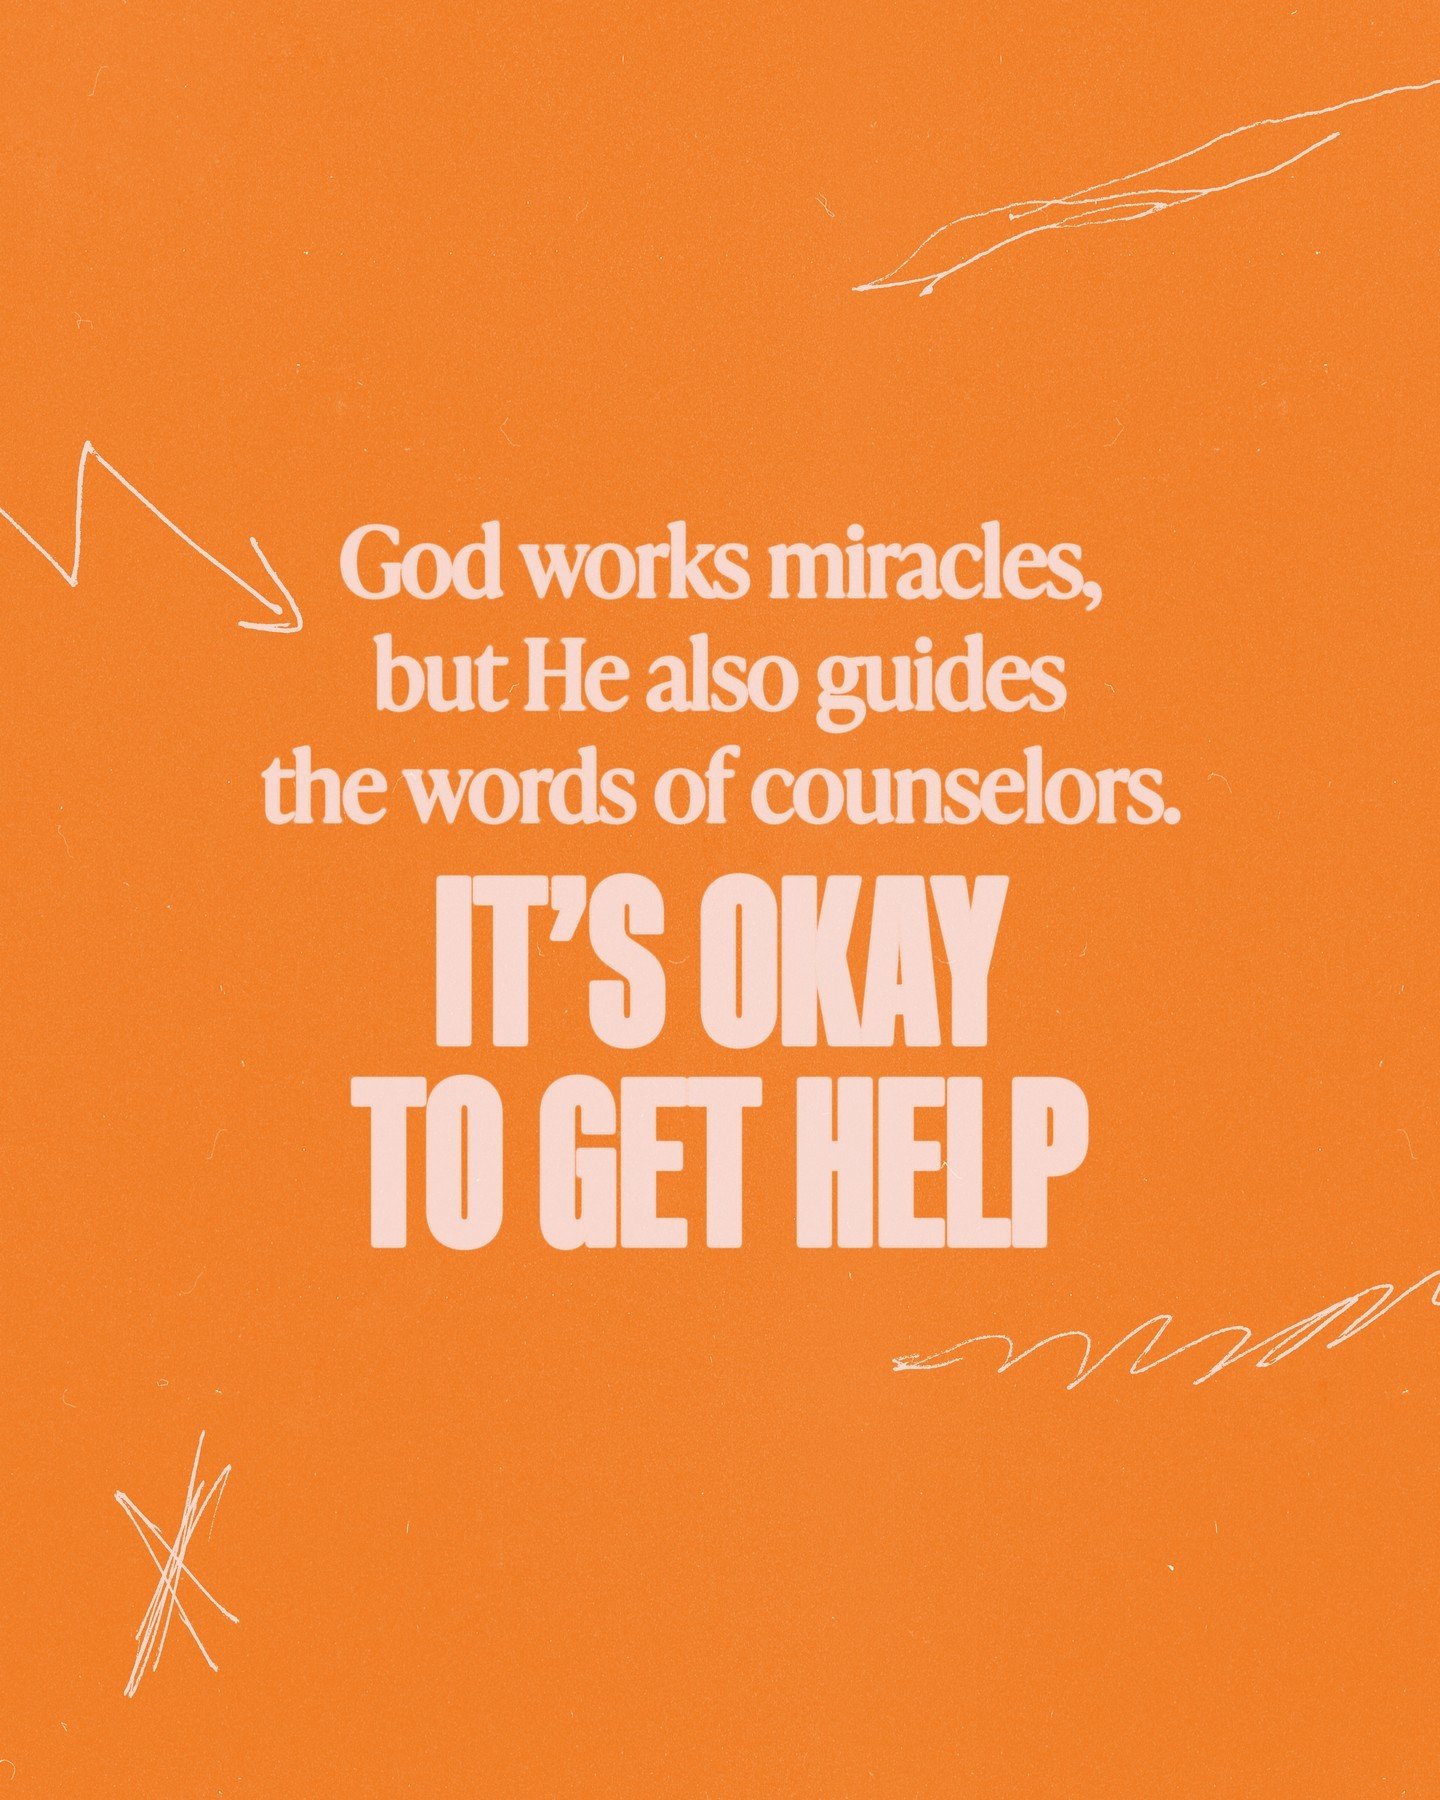 It&rsquo;s possible to have faith for the miracle AND to get professional help. We do what we can do, and God does what we can&rsquo;t!